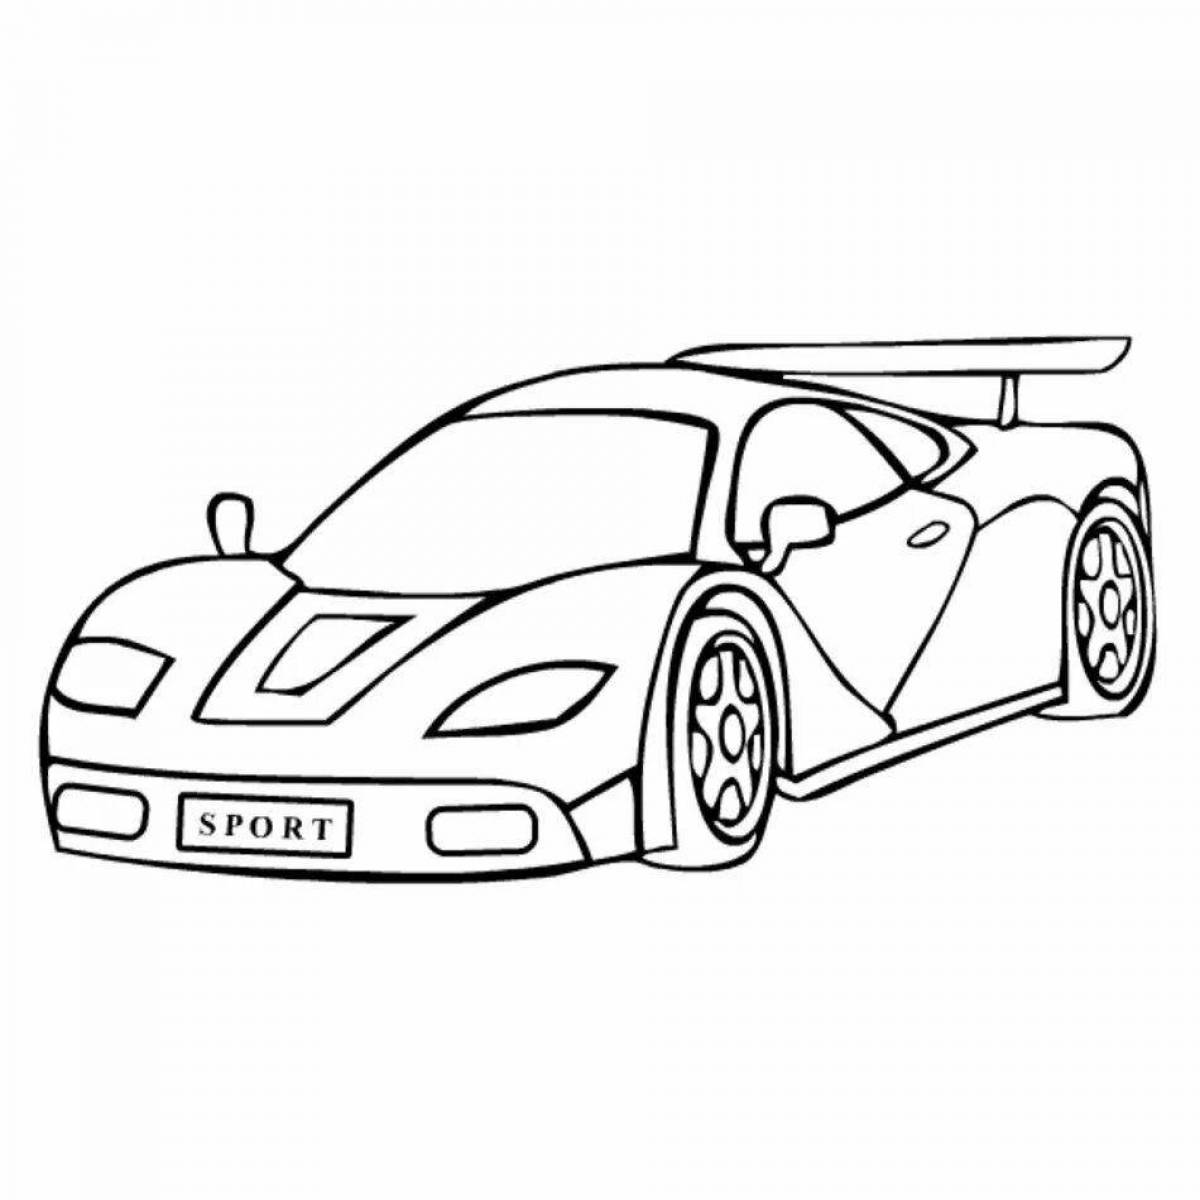 Bright sports car coloring for kids